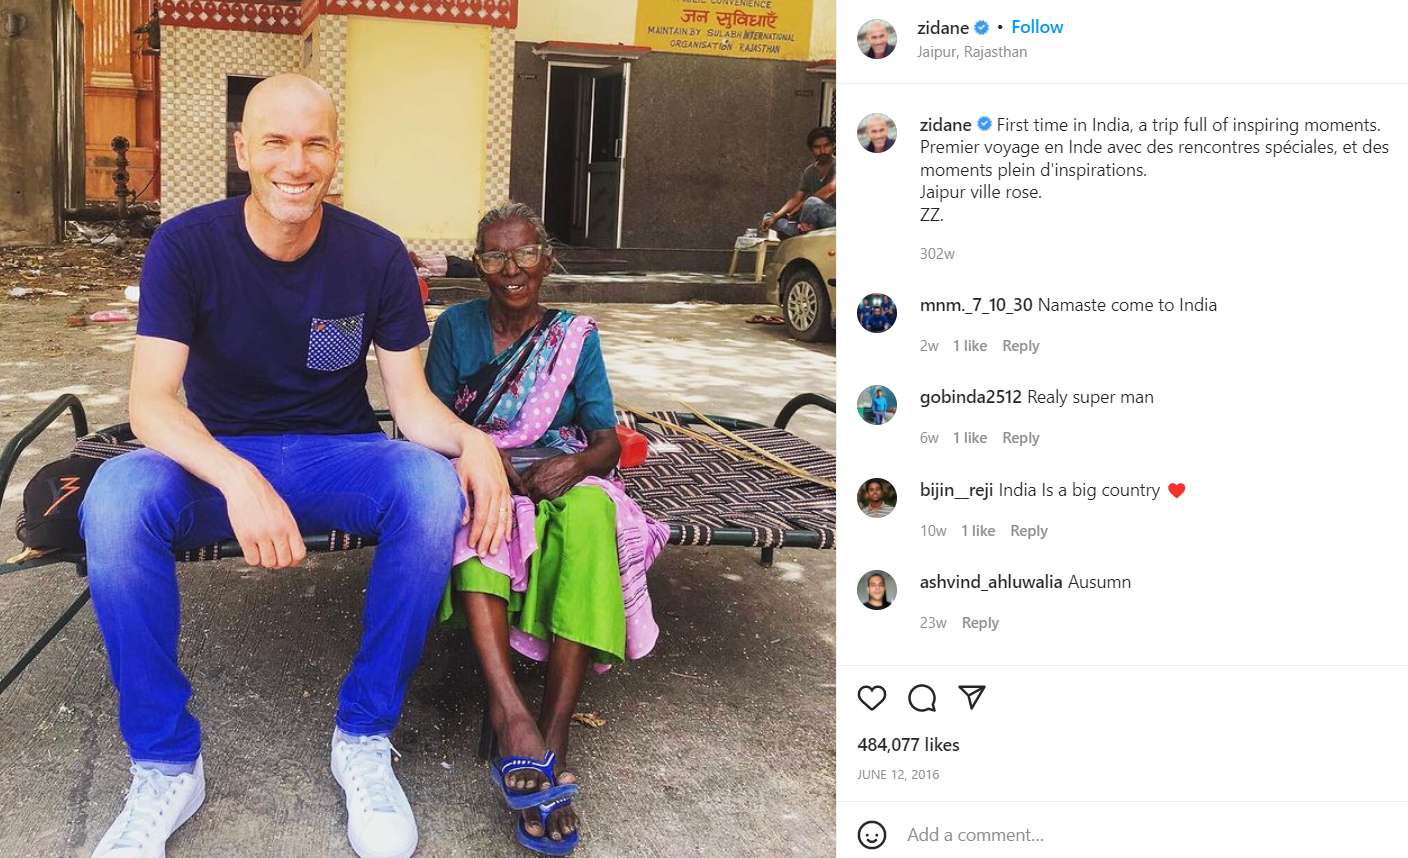 Zinedine Zidane posted on Instagram about his trip to Jaipur